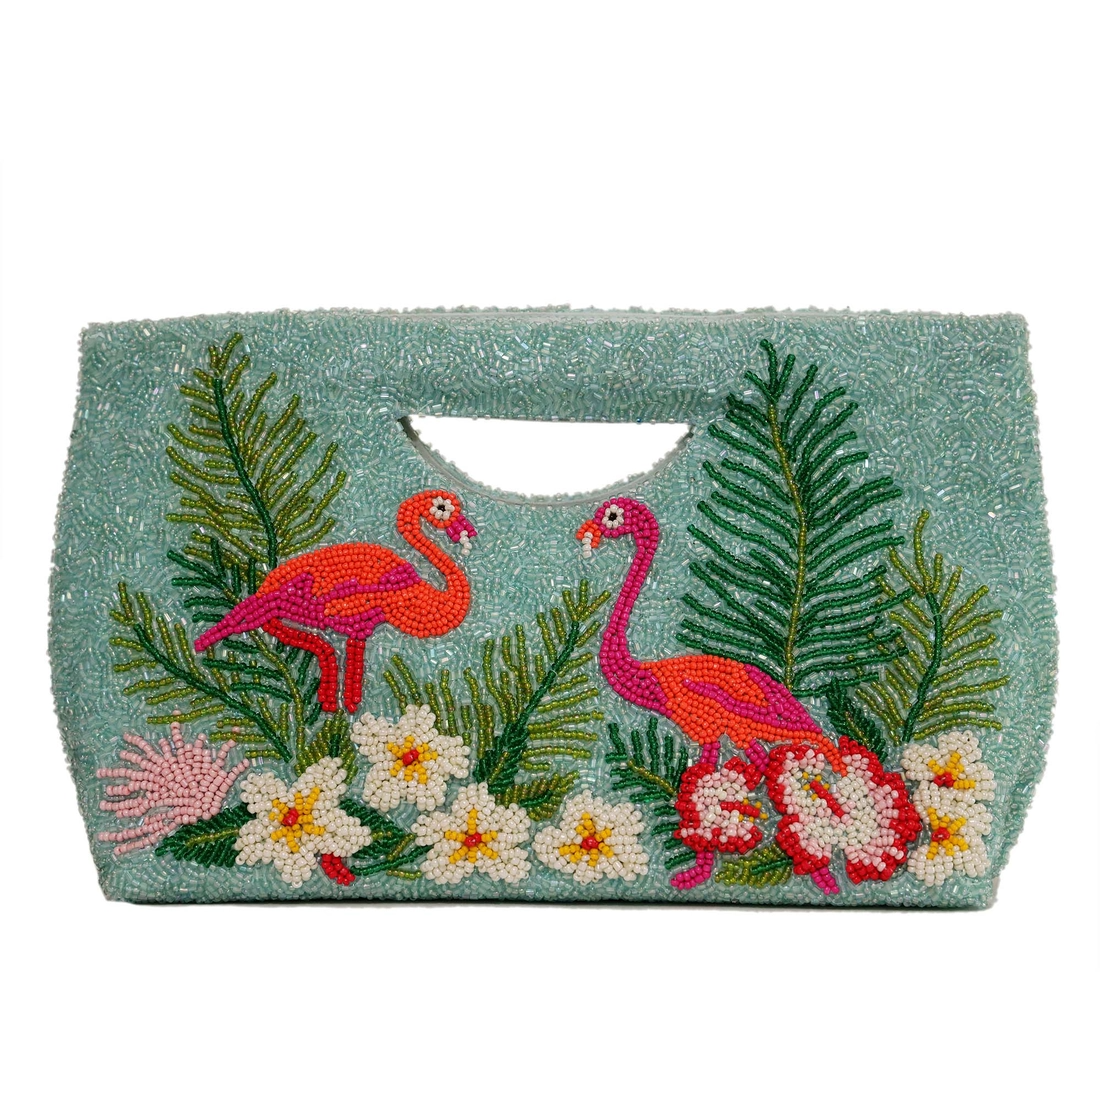 Flamingo hand-beaded cut-out clutch